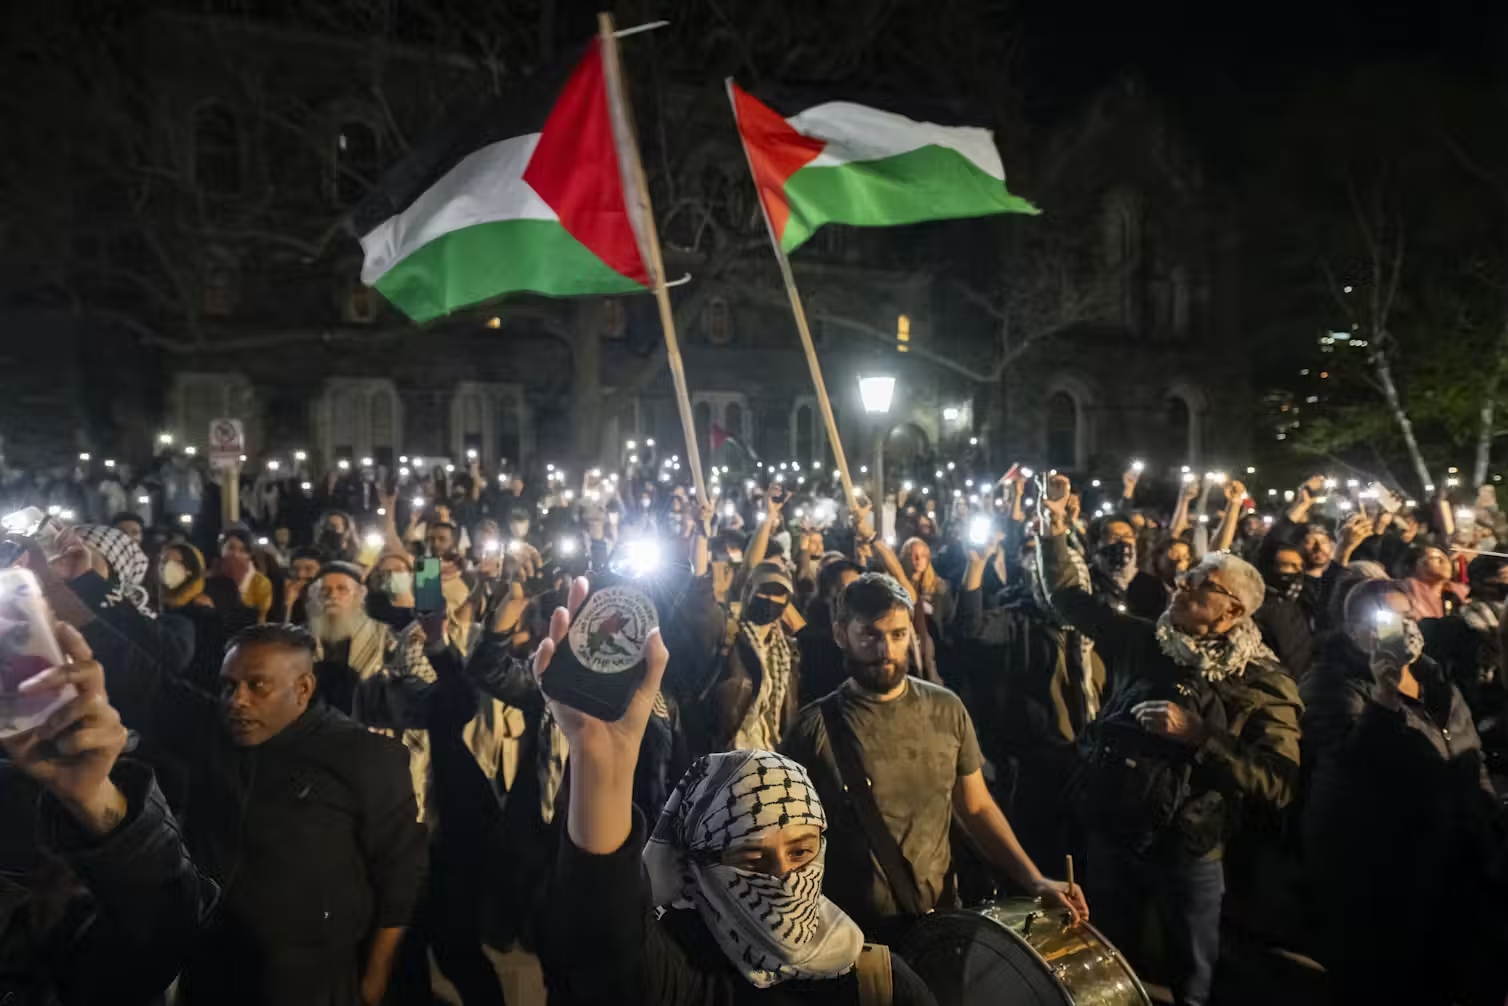 A nighttime protest shows demonstrators waving Palestinian flags.